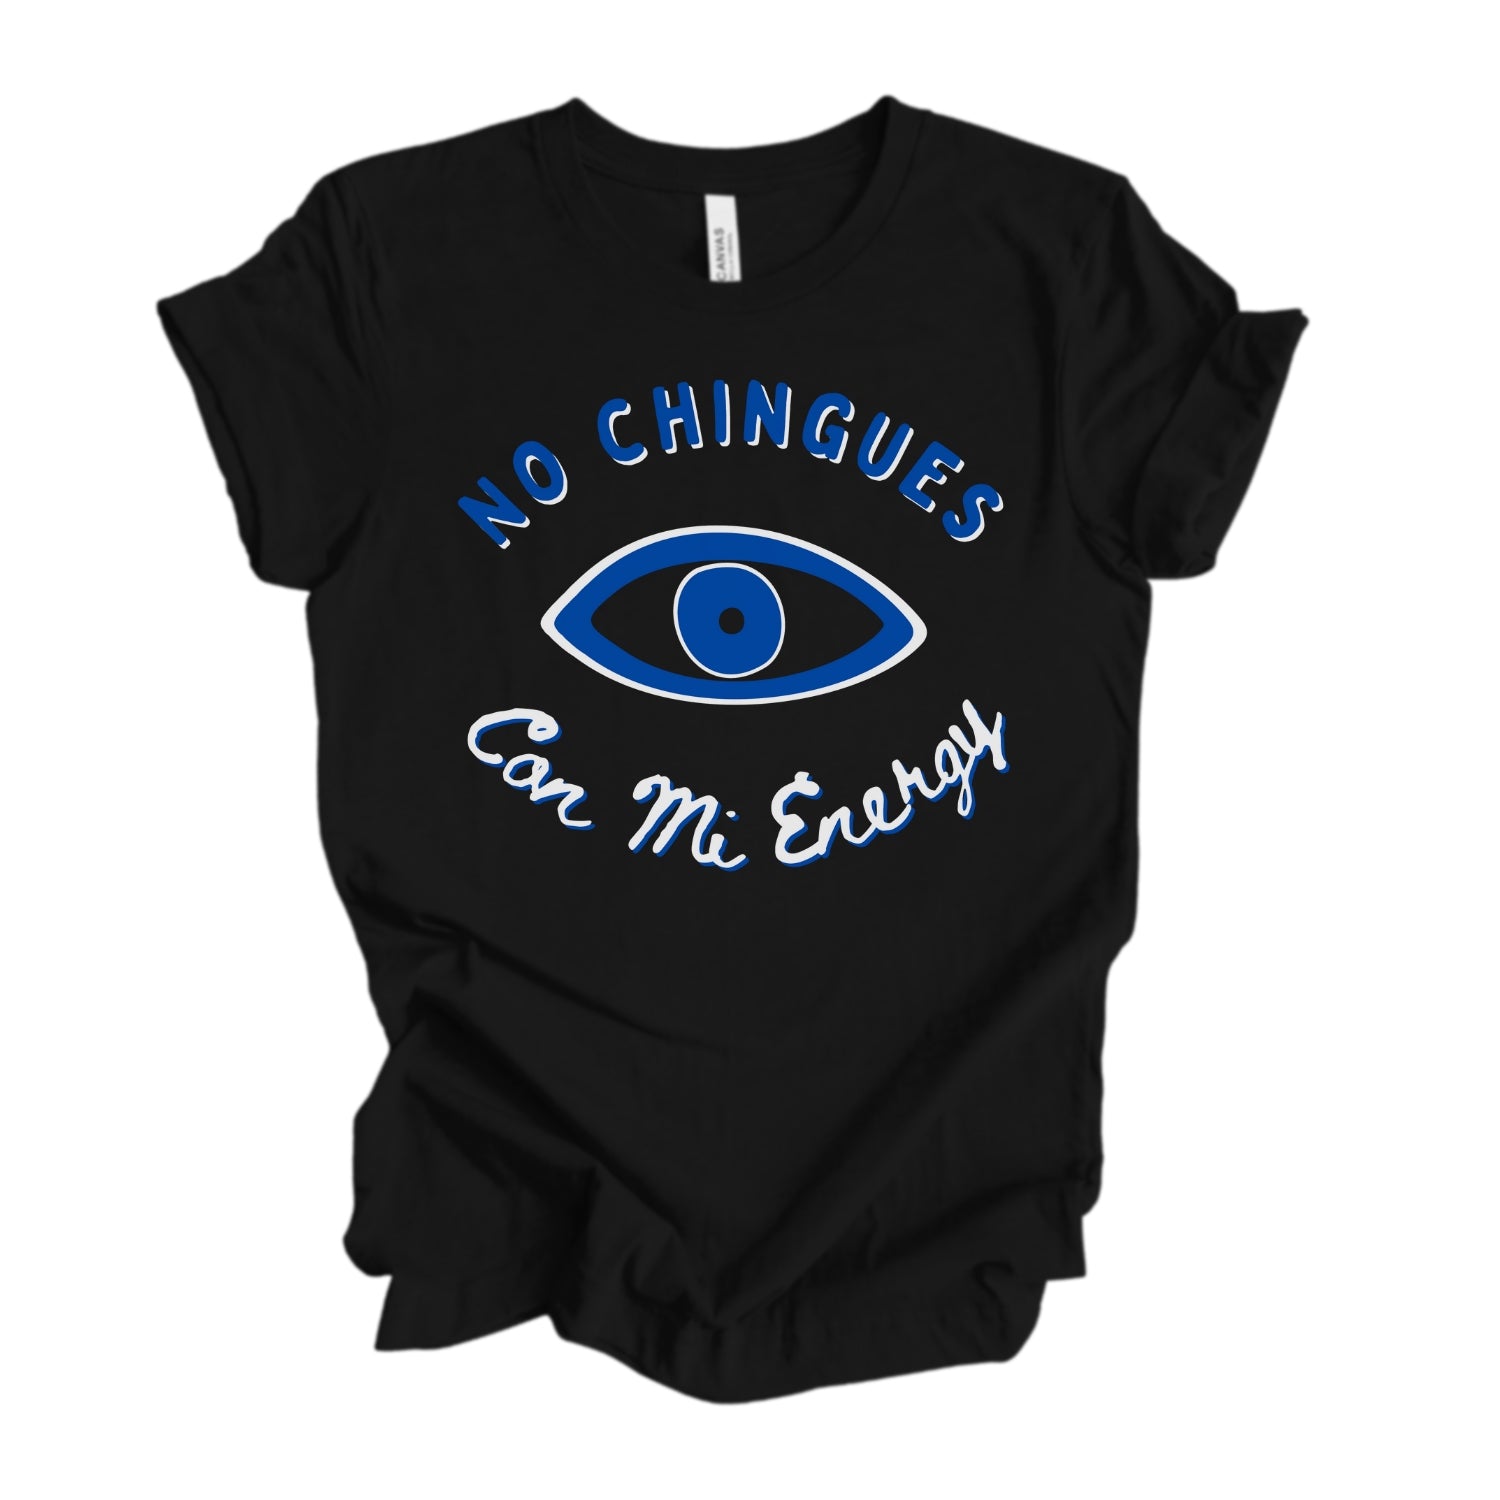 Black t-shirt featuring stylized evil eye and text 'no chingues con mi energy'